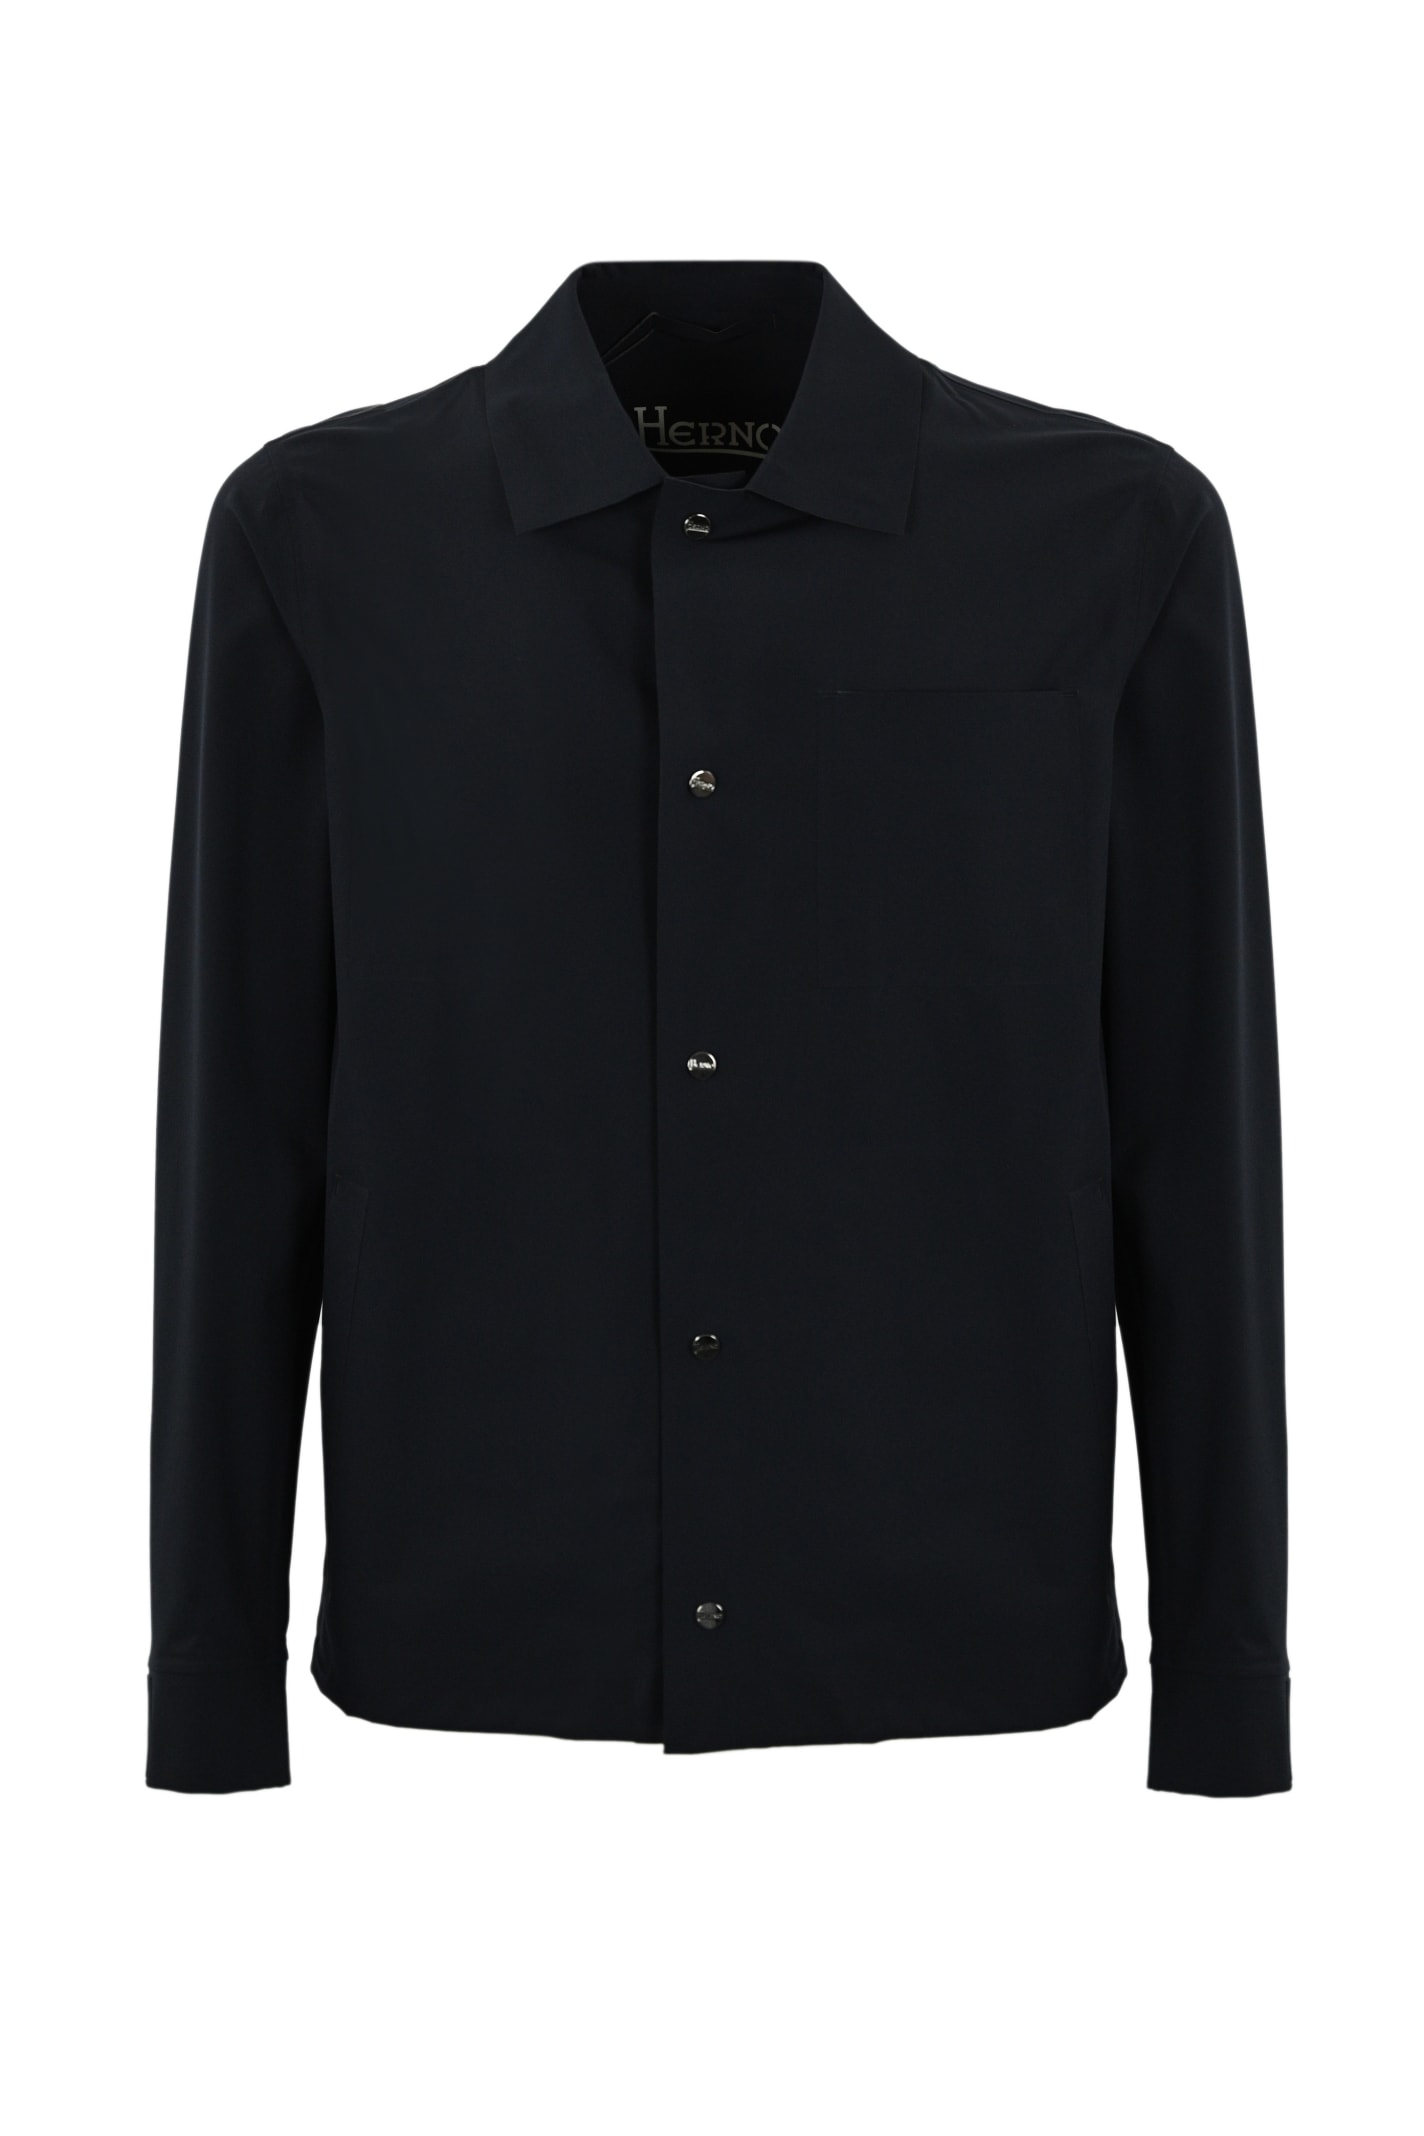 Herno Technical Fabric Jacket In Blu